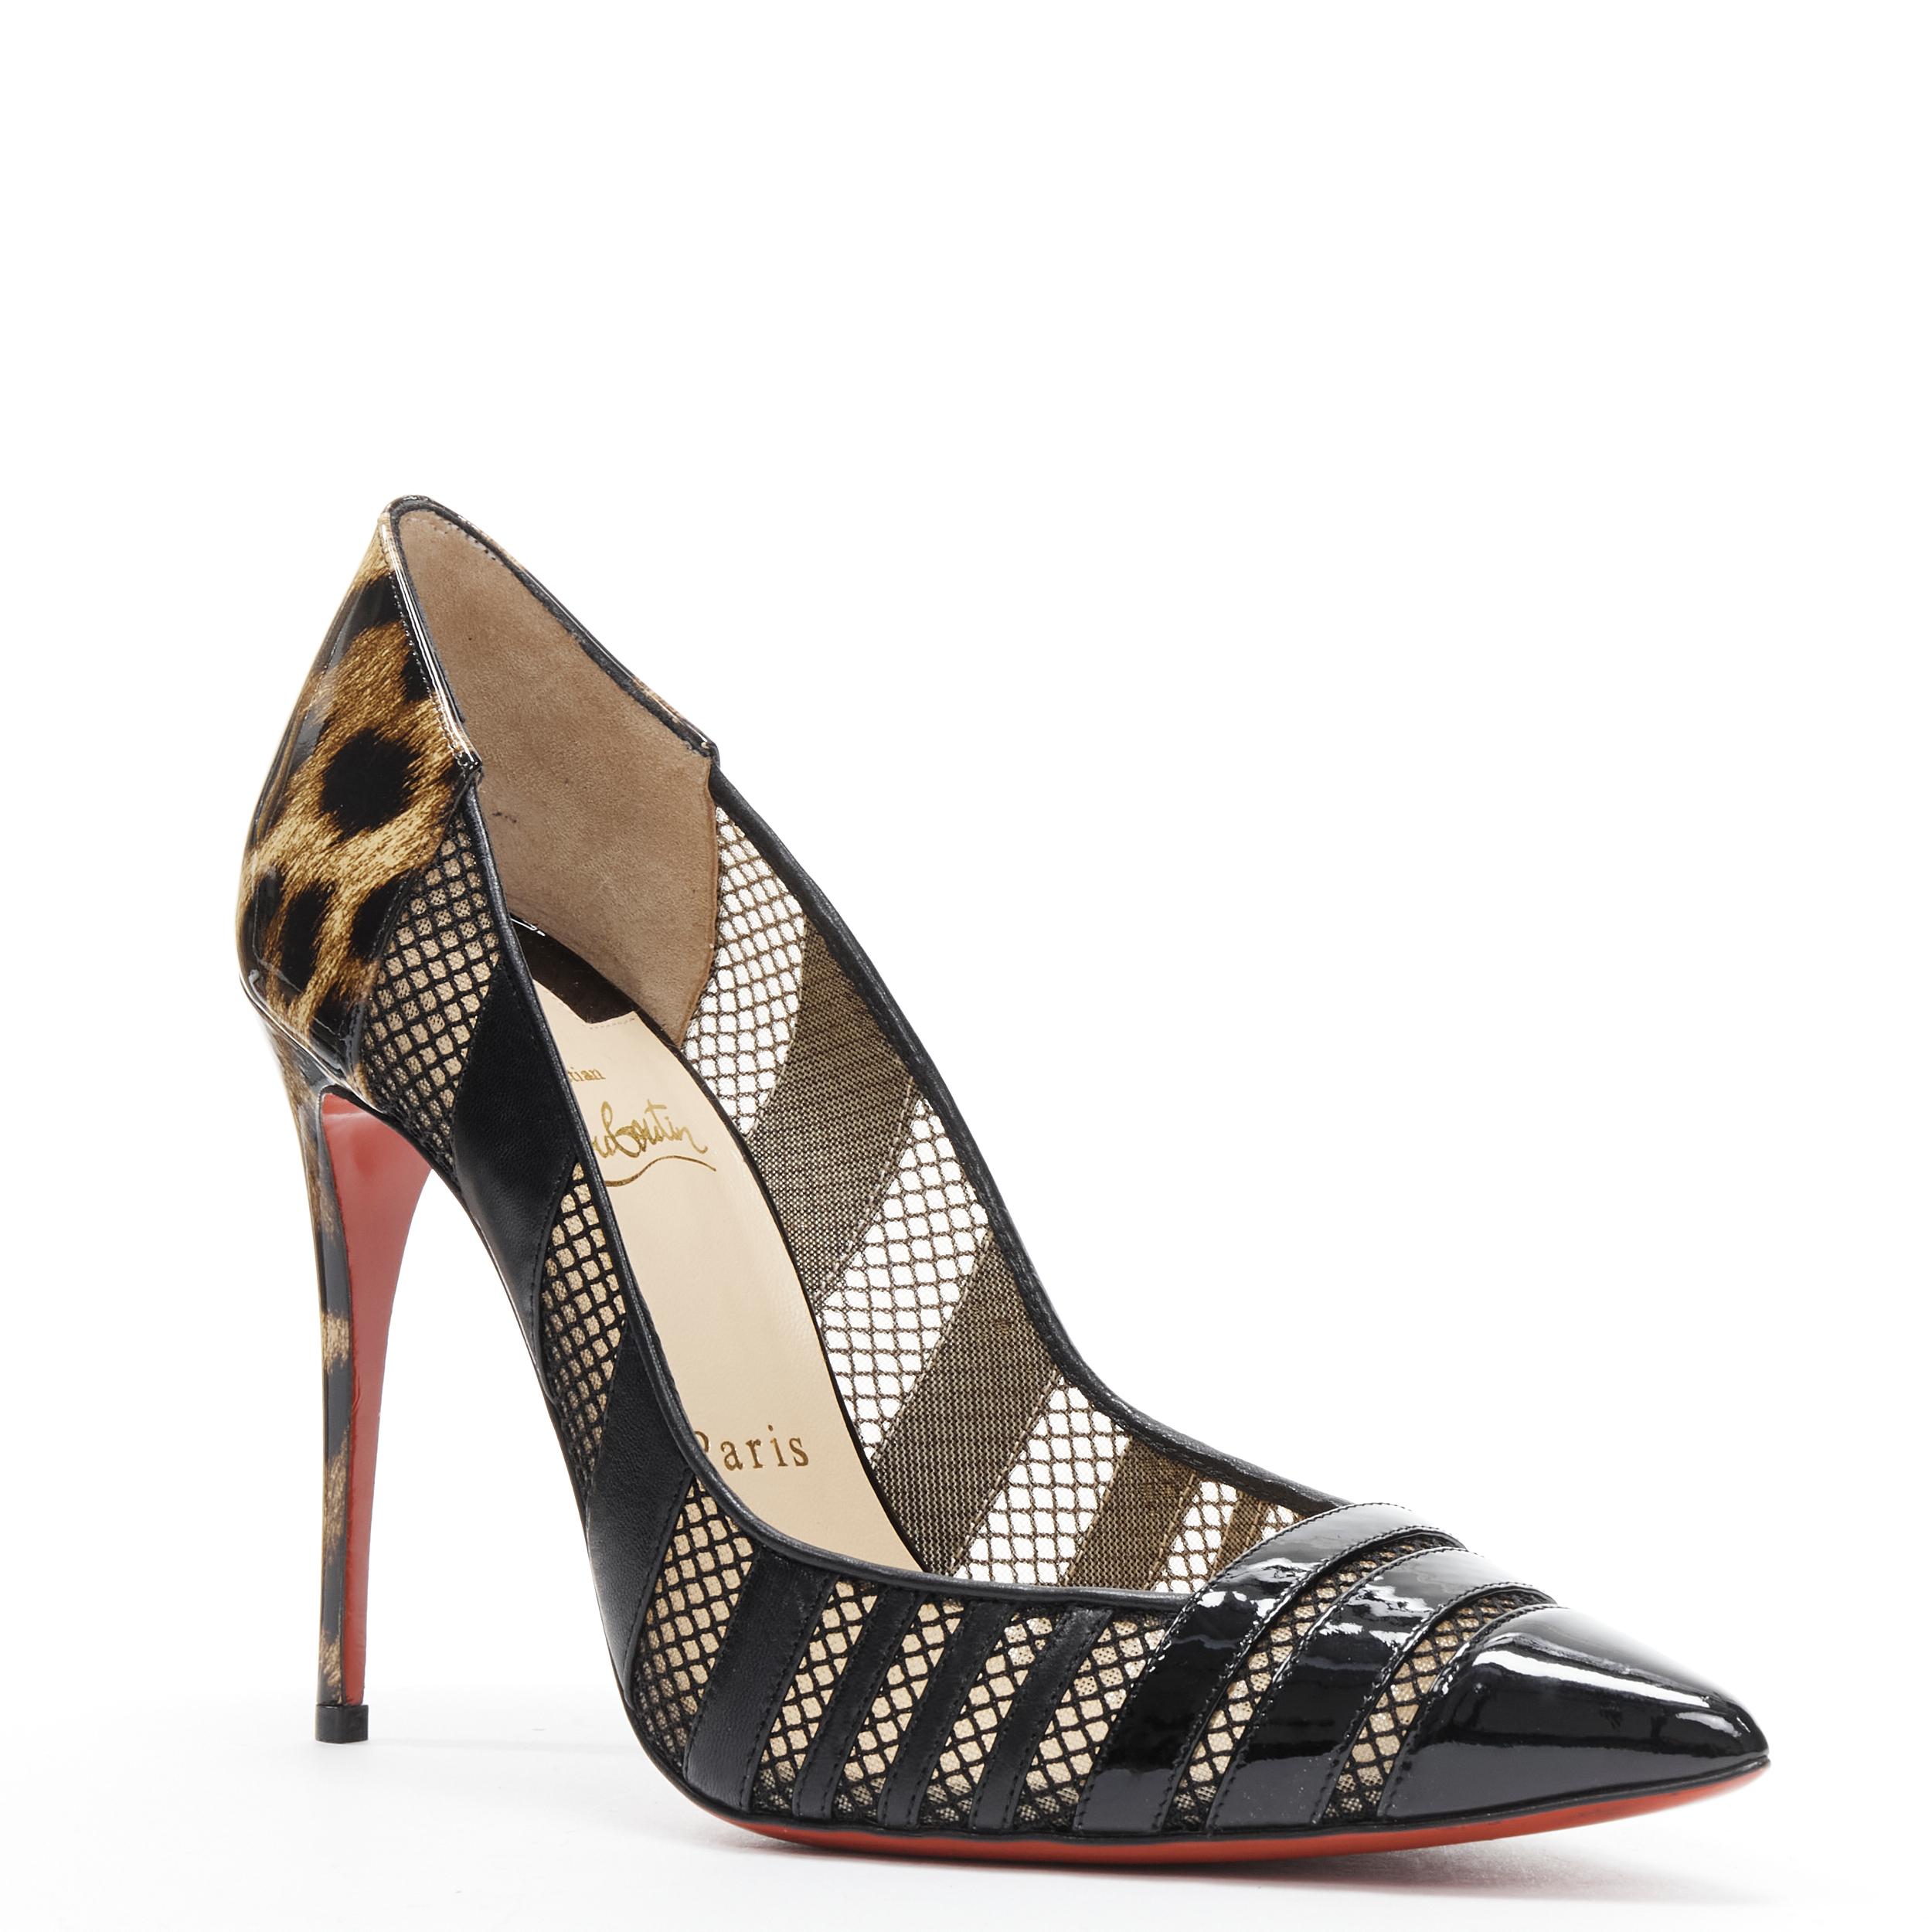 CHRISTIAN LOUBOUTIN Bandy 100 leopard patent mesh pigalle pump EU38 
Reference: TGAS/B01807 
Brand: Christian Louboutin 
Designer: Christian Louboutin 
Model: Bandy 100 
Material: Patent Leather 
Color: Multicolour 
Pattern: Leopard 
Extra Detail: